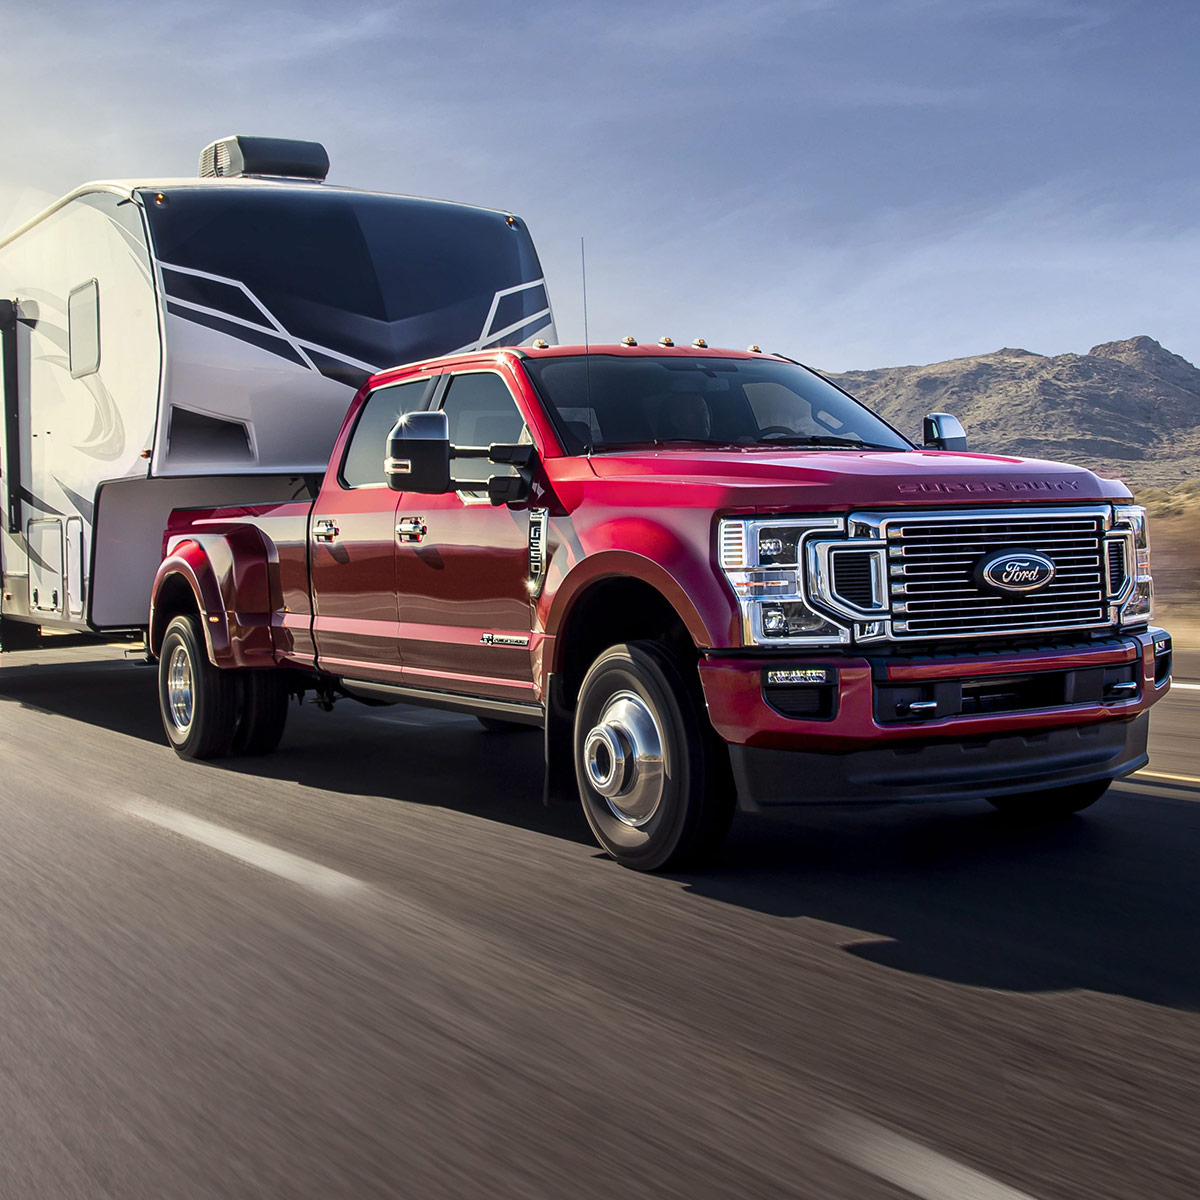 2022 Ford Super Duty hauling an RV on the highway